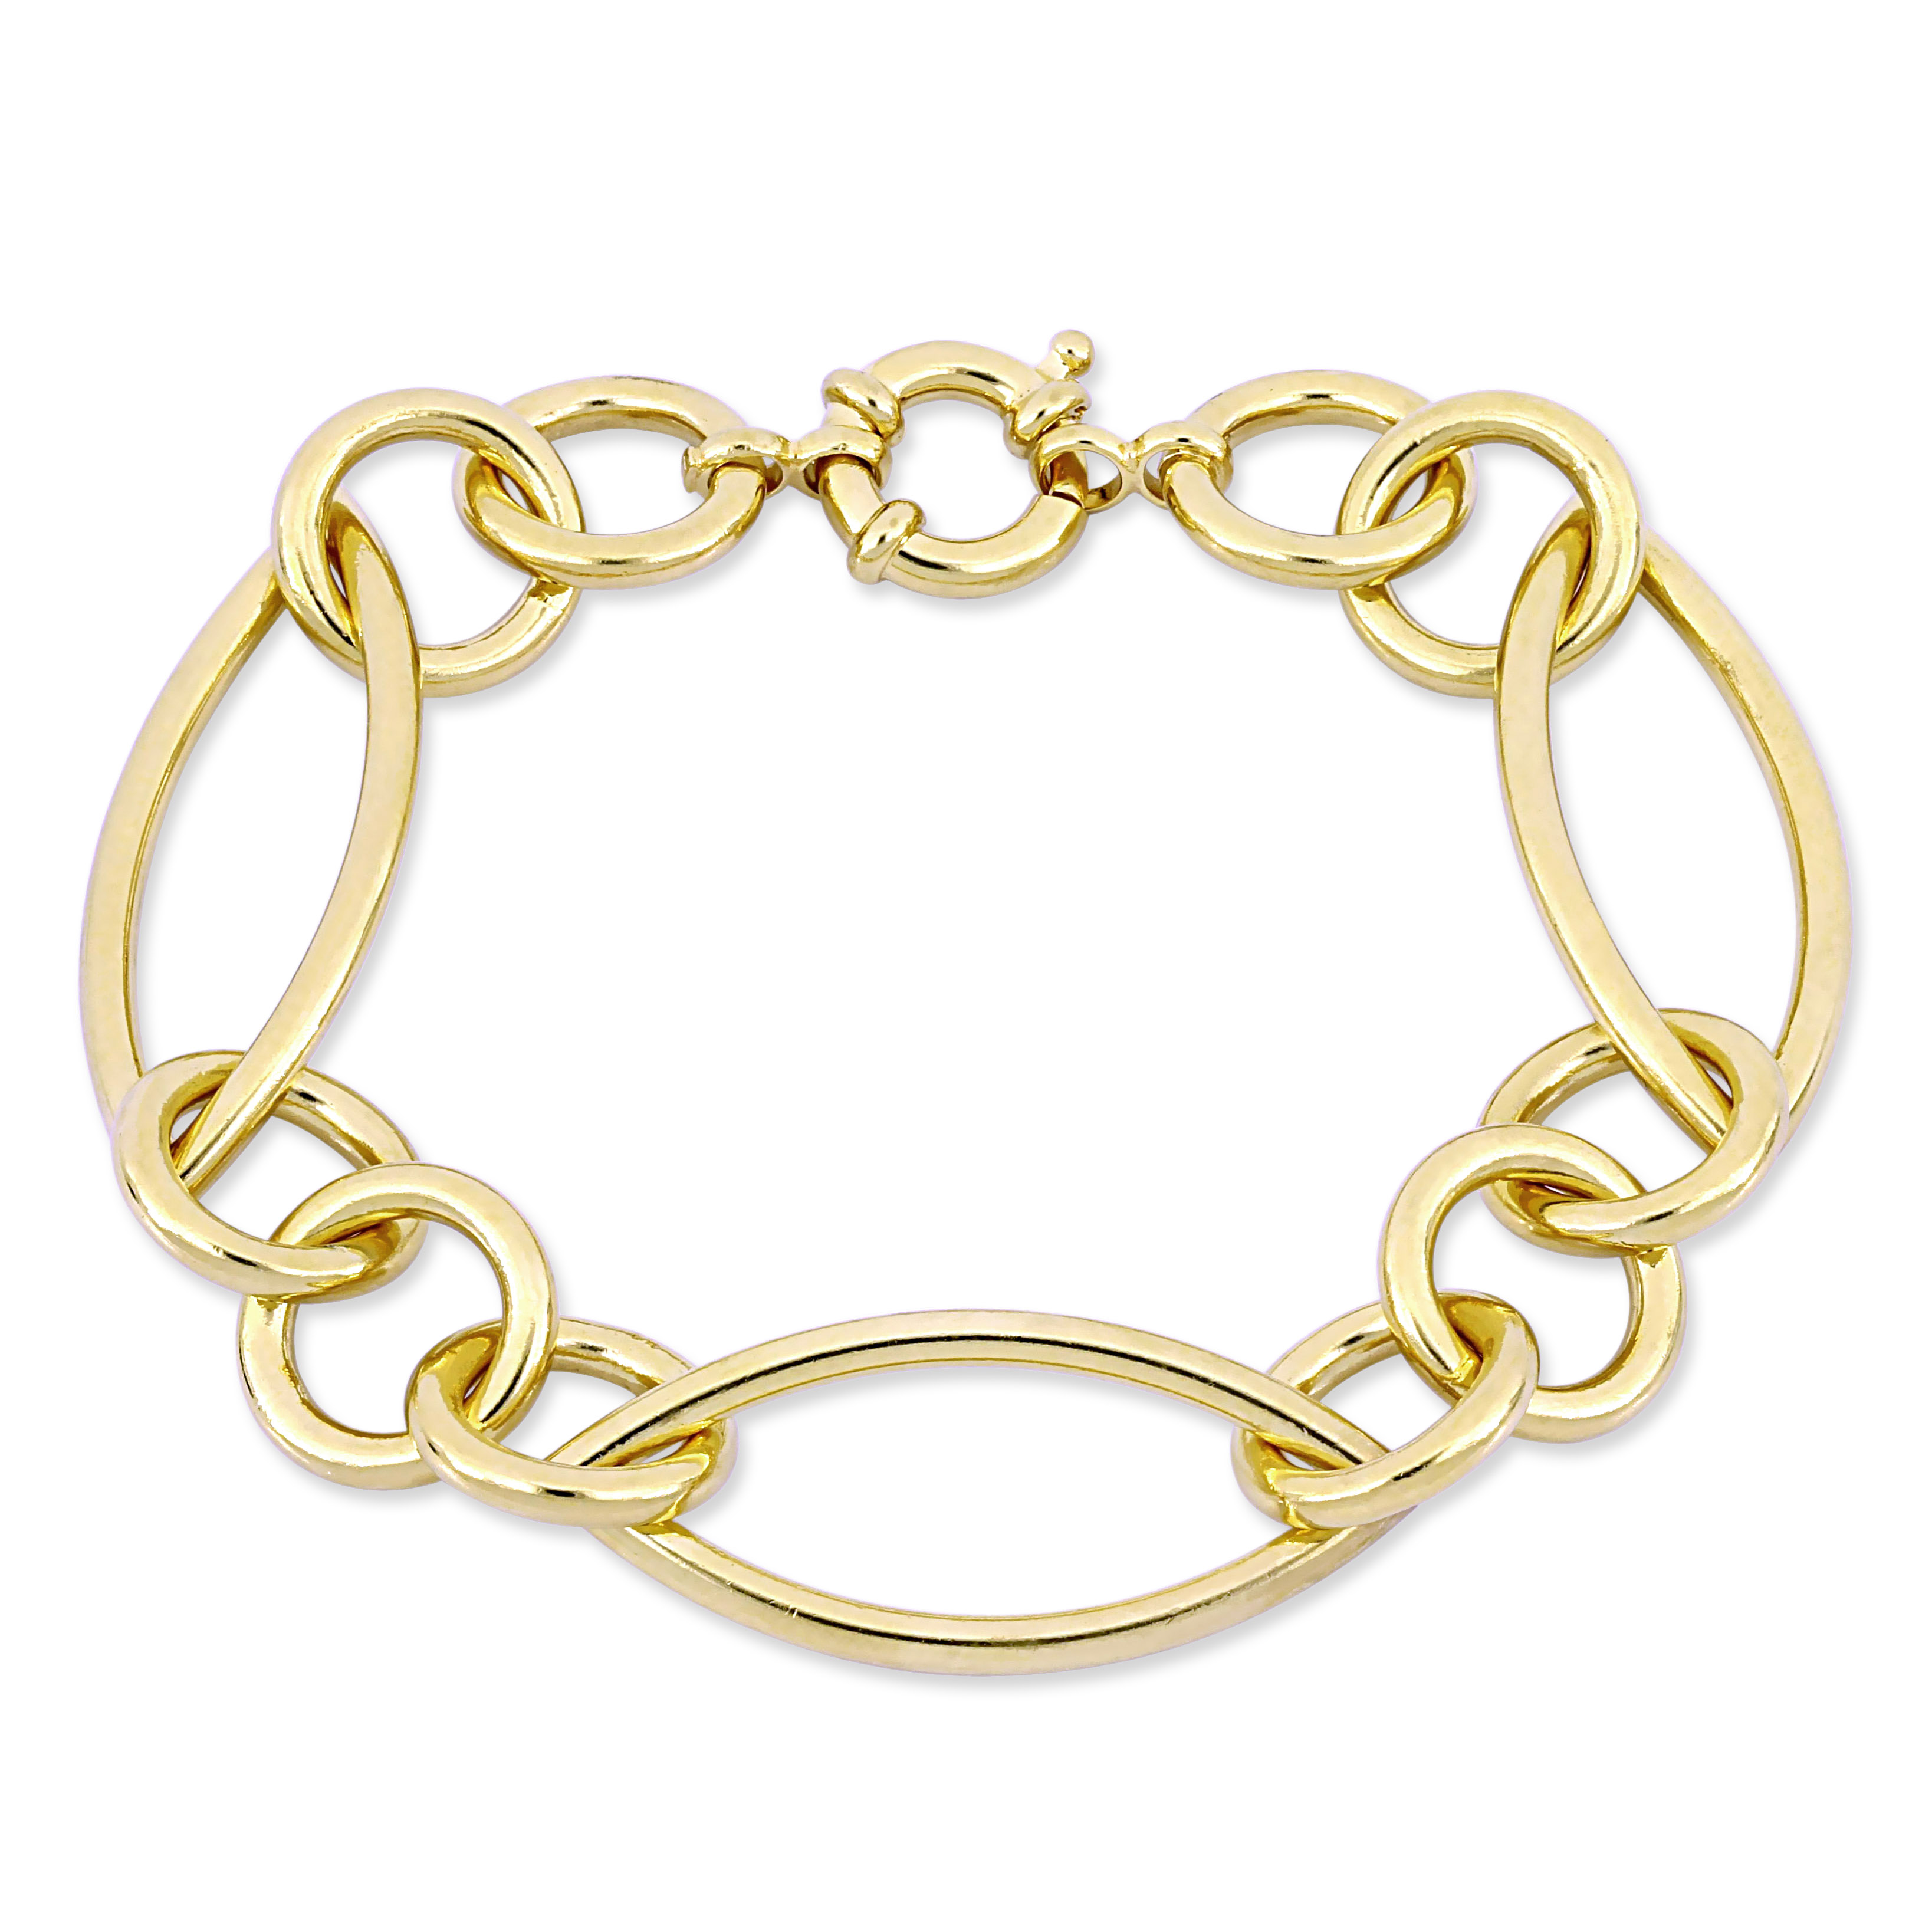 Link Bracelet in Yellow Plated Sterling Silver - 8 in.